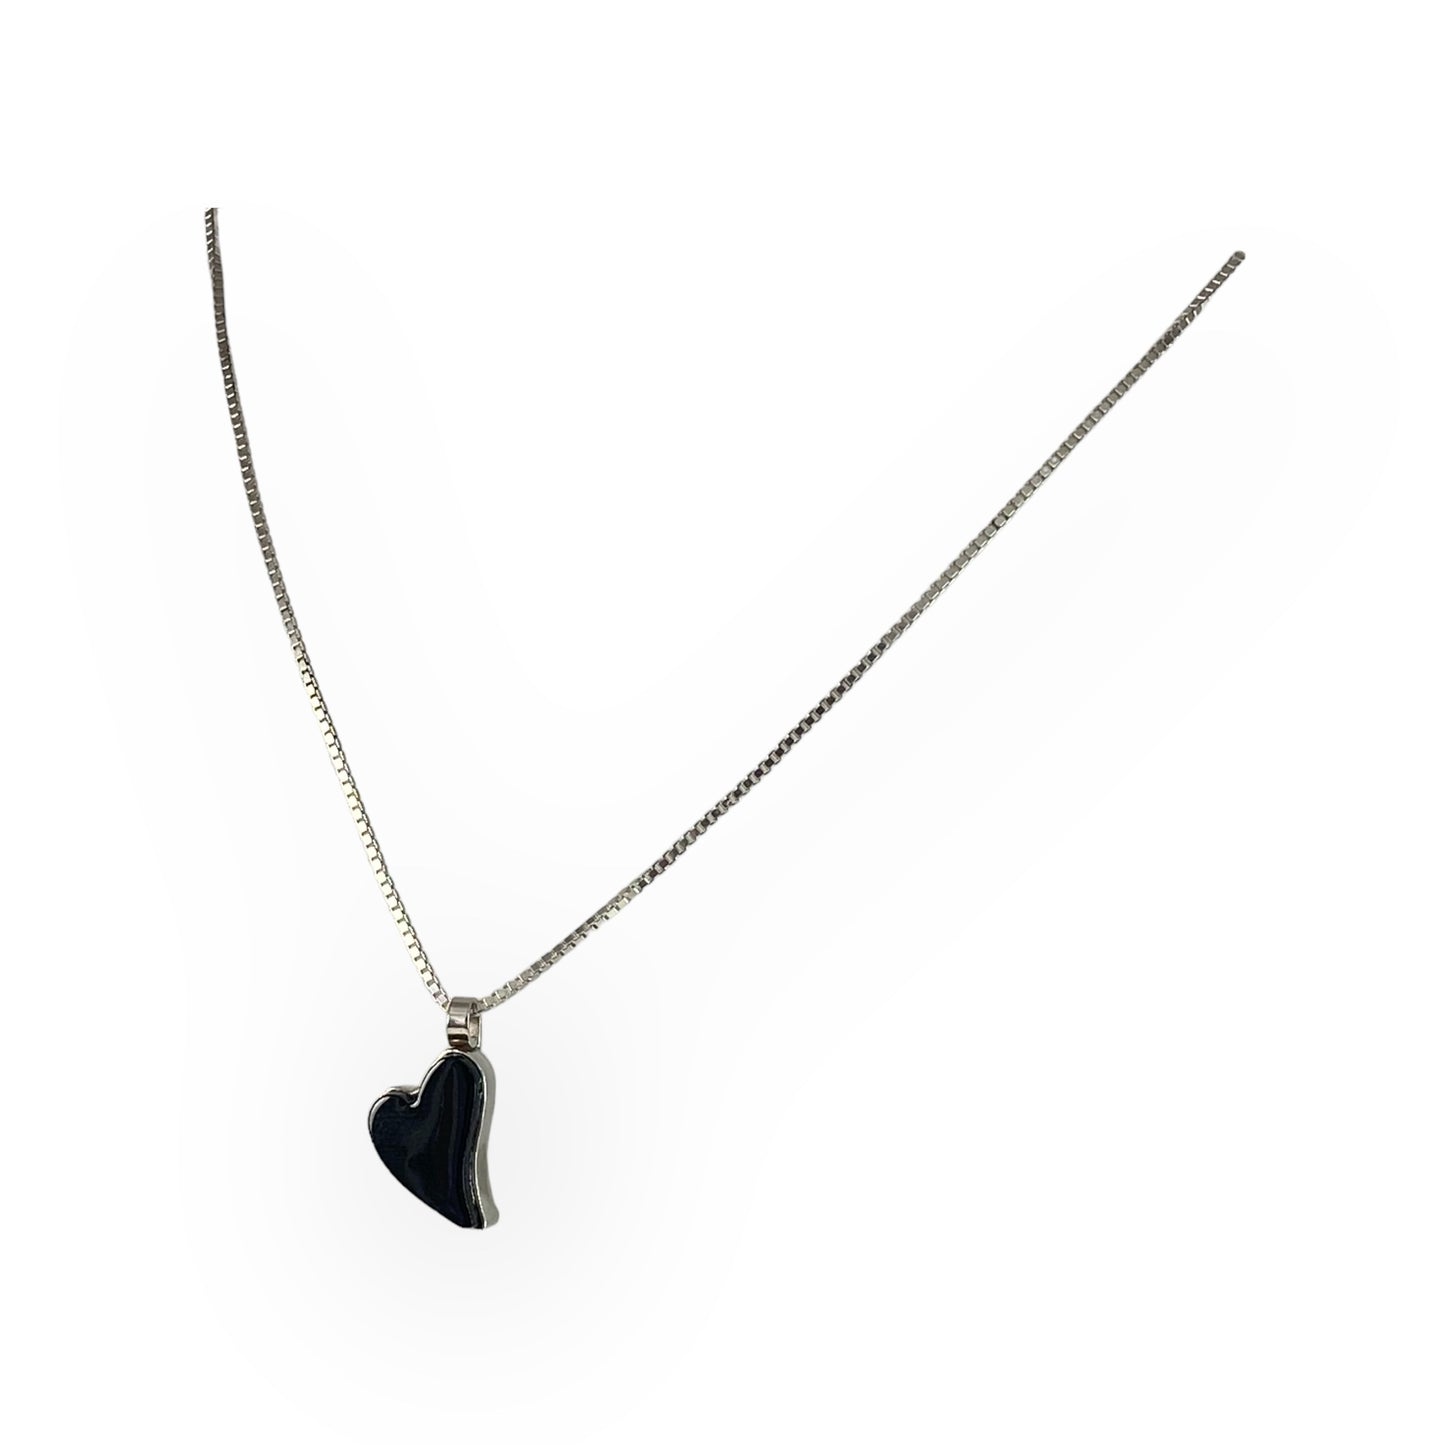 Small Curved Heart Necklace in Black